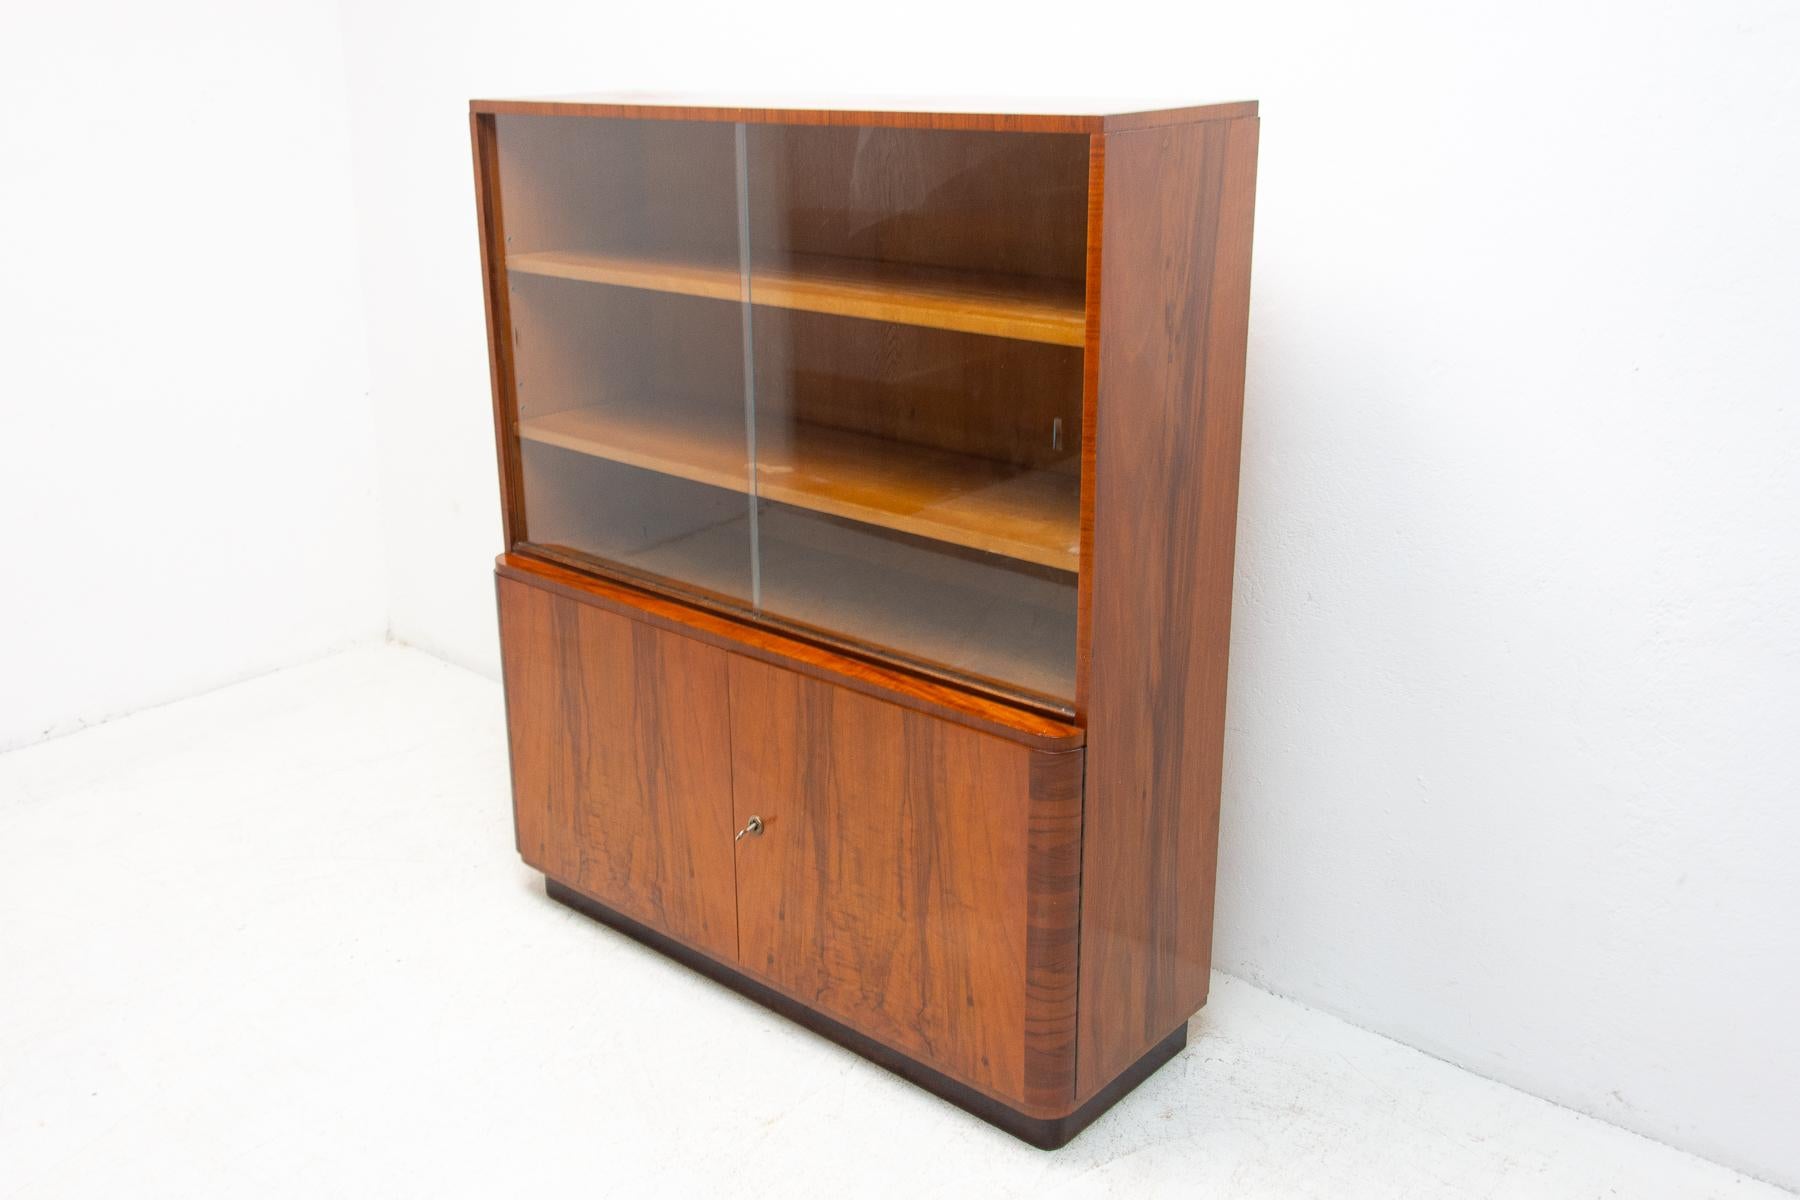 Mid-century walnut bookcase from the 1950's. It was made in the former Czechoslovakia in UP Závody company. Features a simple design, a glazed section with three storage spaces and two lockable at the bottom. In Very good condition. Beautiful walnut